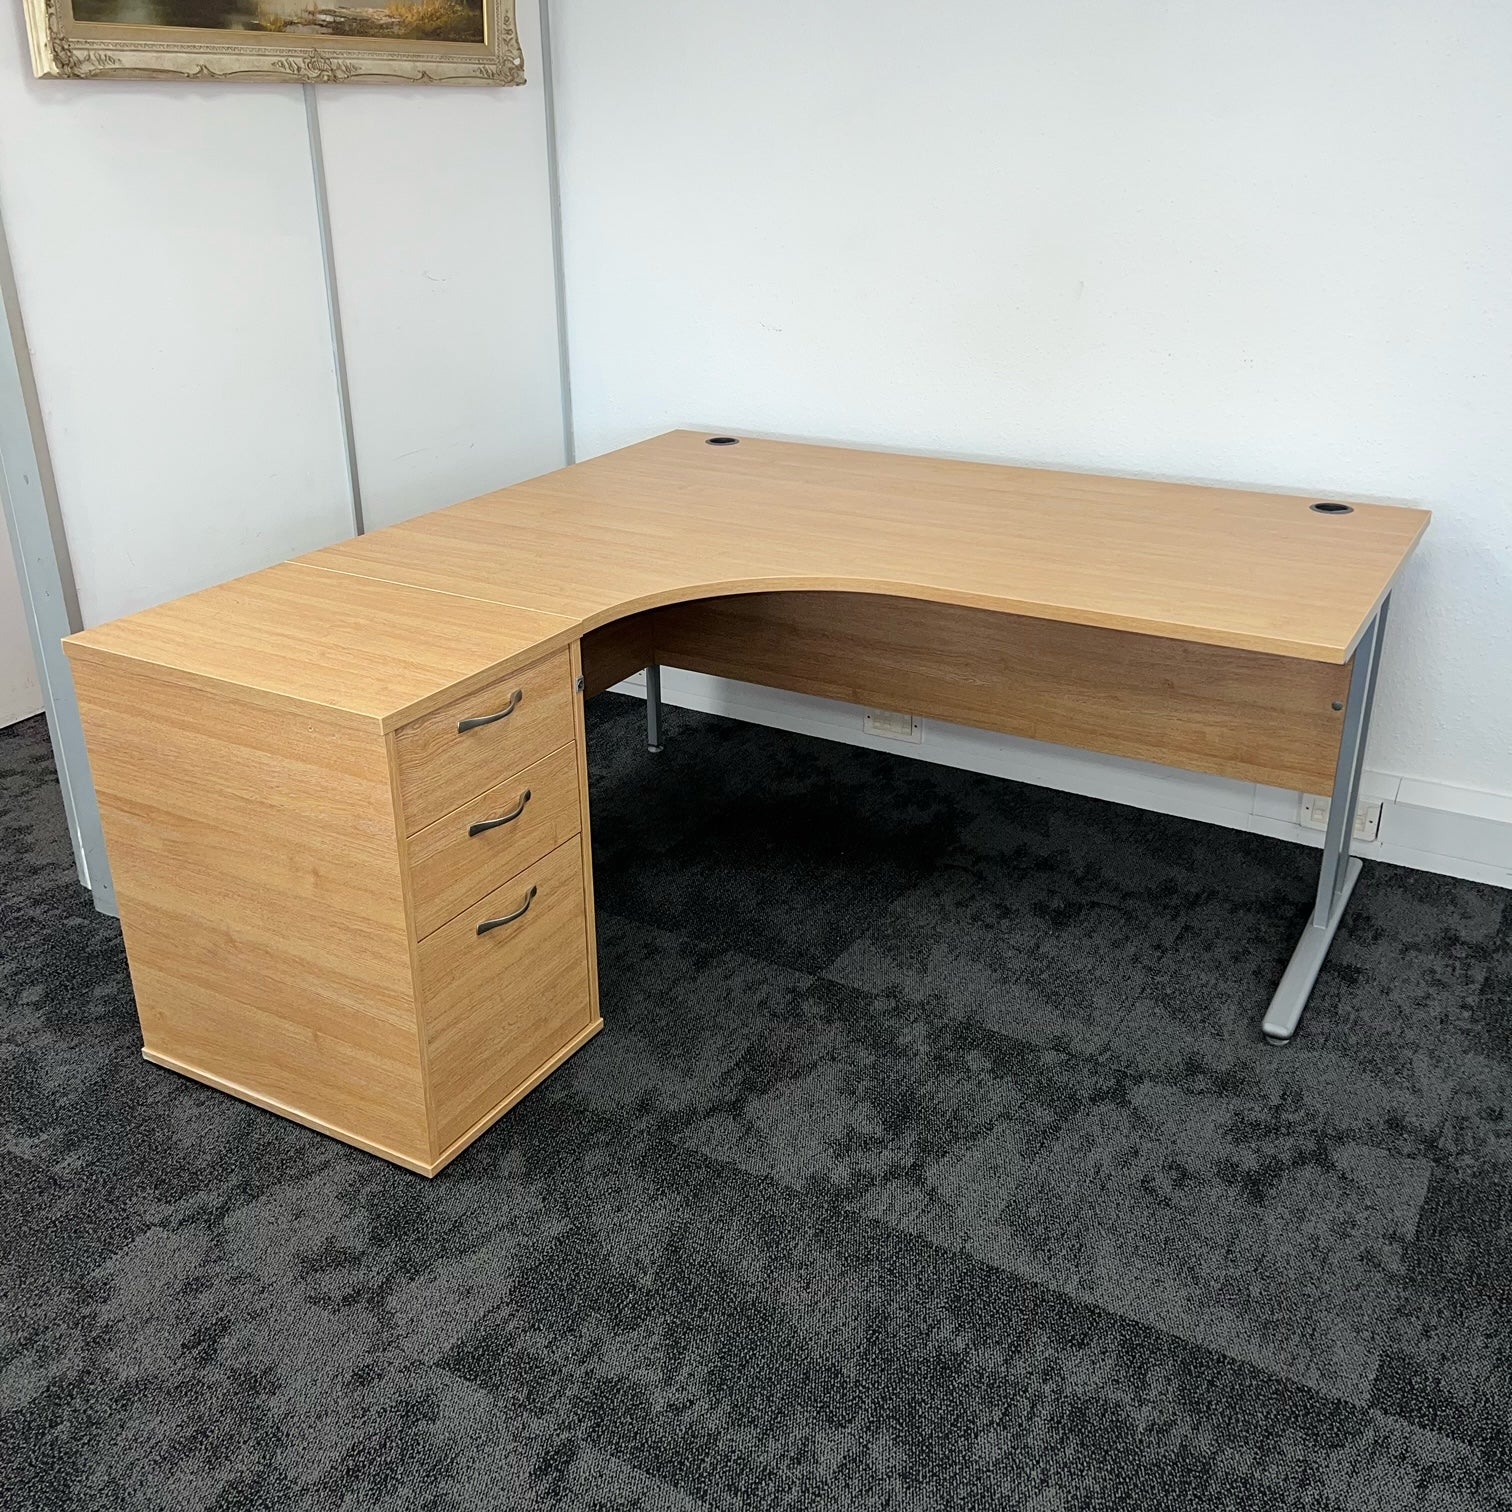 Second Hand Office Furniture - Chairs, Desks, Storage - Kings